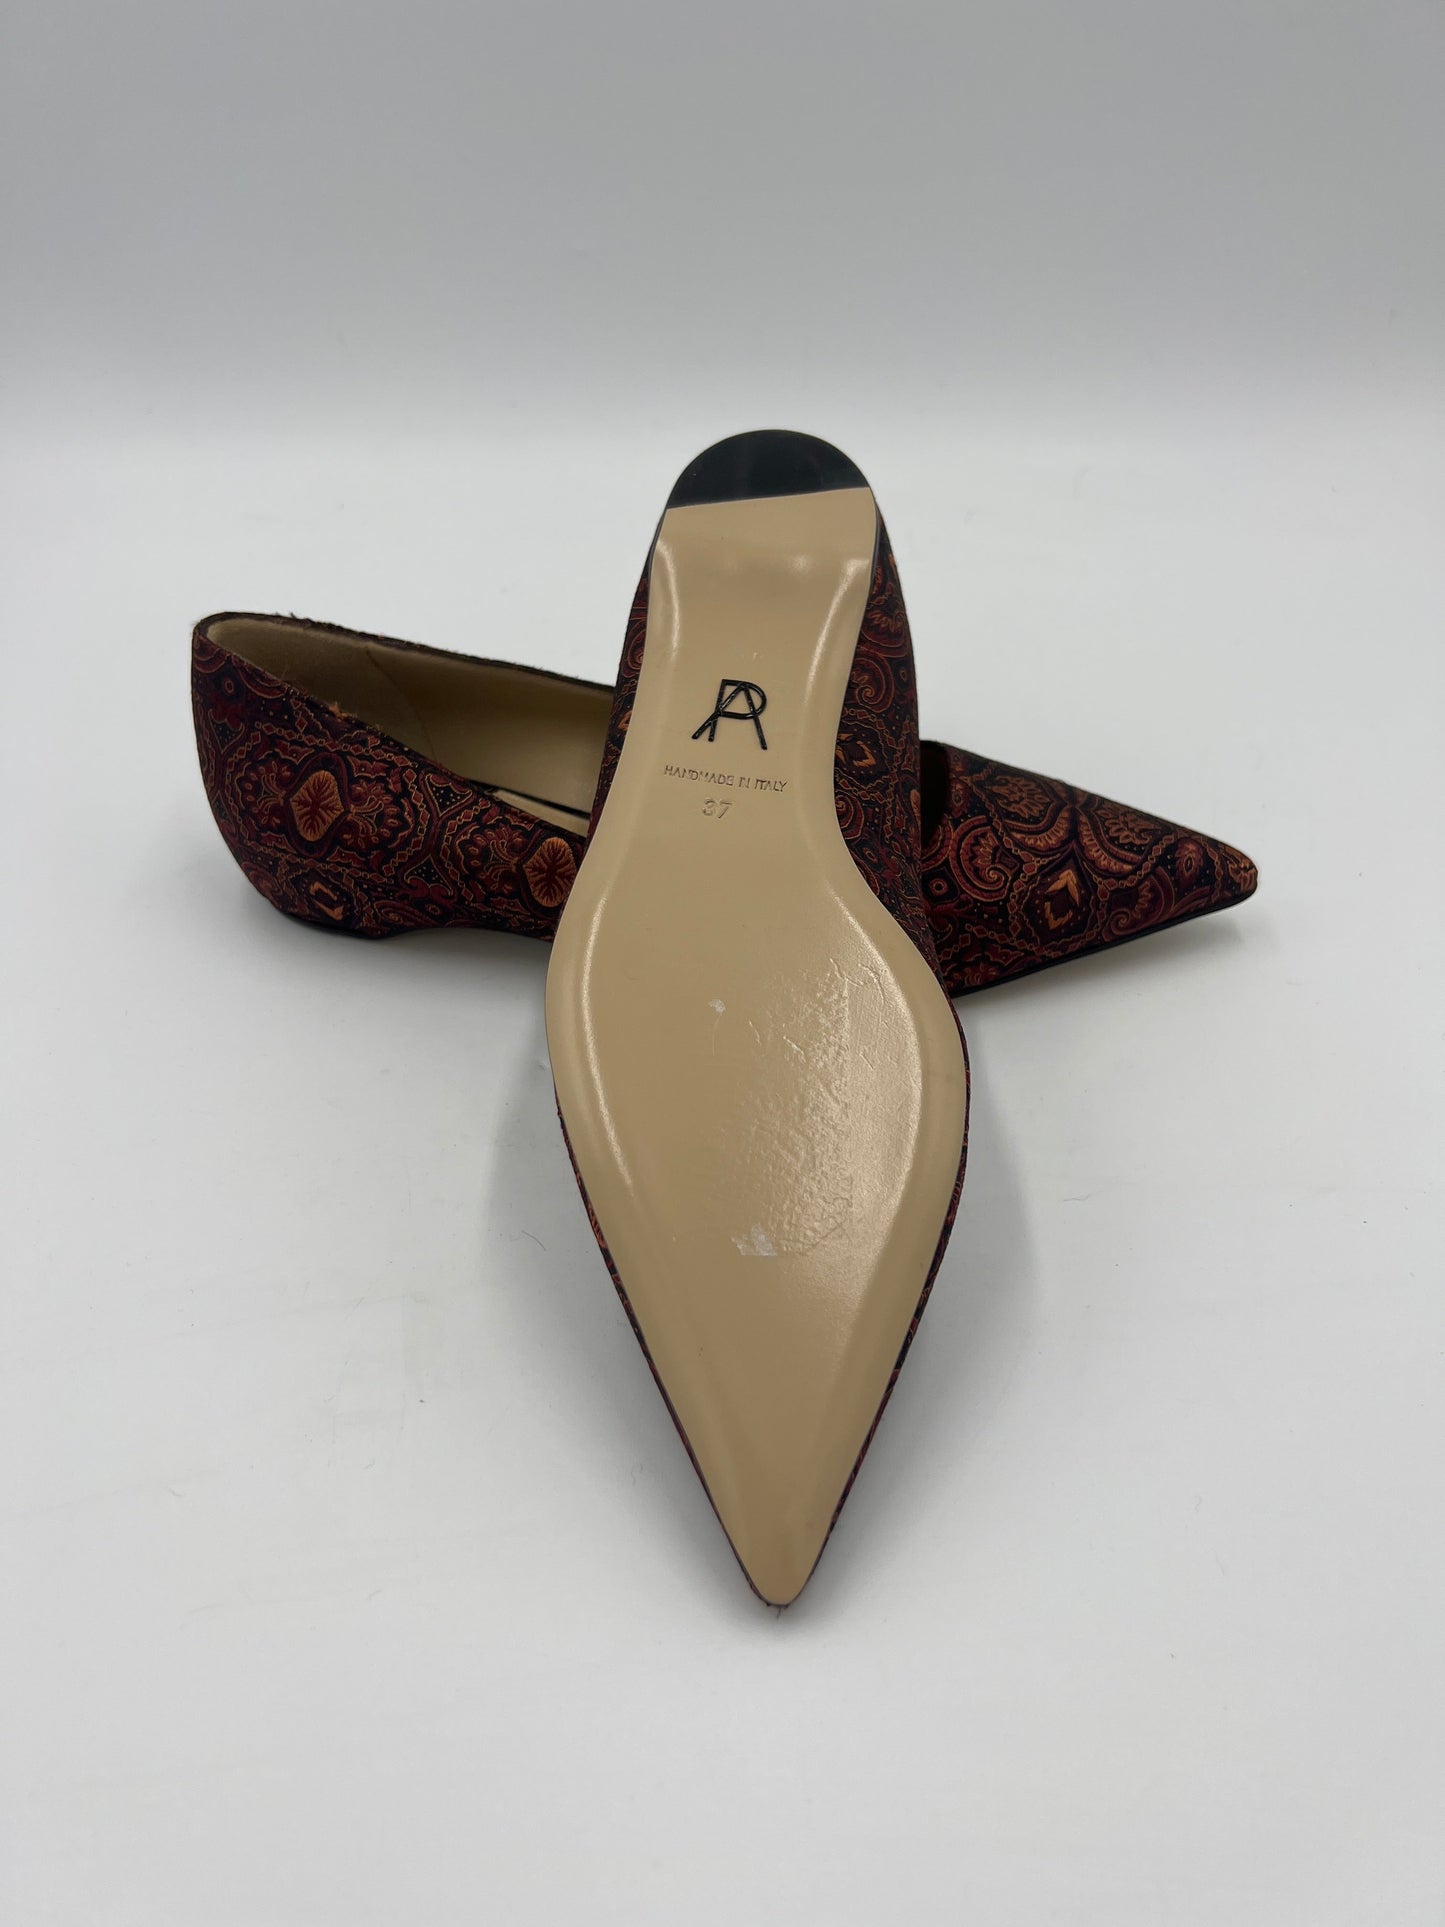 Shoes Flats Ballet By Paul Andrew  Size: 7